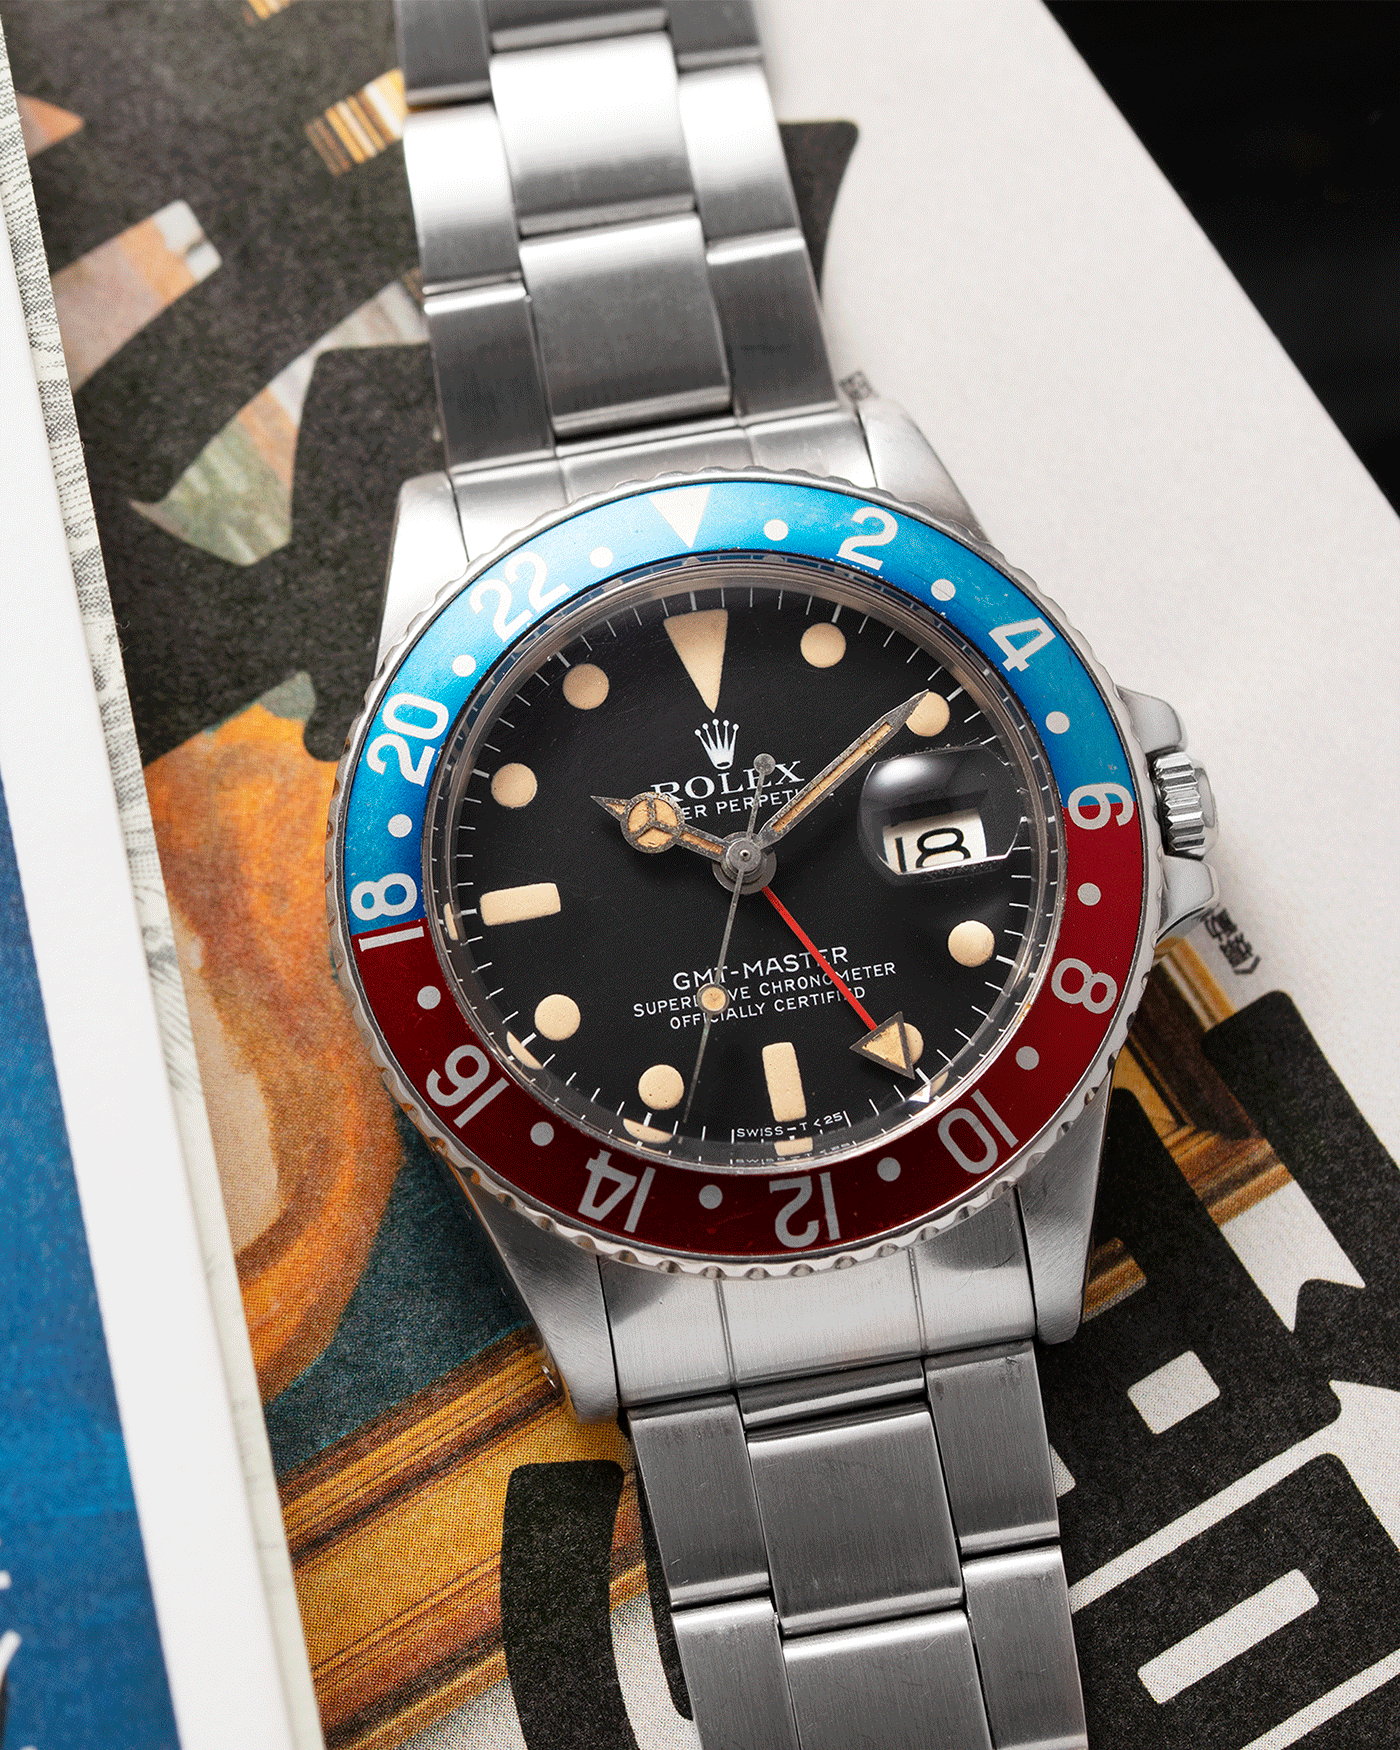 Brand: Rolex Year: 1978/79 Model: GMT-Master Reference Number: 1675 Serial Number: 5,73X,XXX Material: Stainless Steel Movement: Cal. 1570 Case Diameter: 40mm Lug Width: 20mm Bracelet: Rolex 7836 Folded Oyster Bracelet with ‘358’ end links